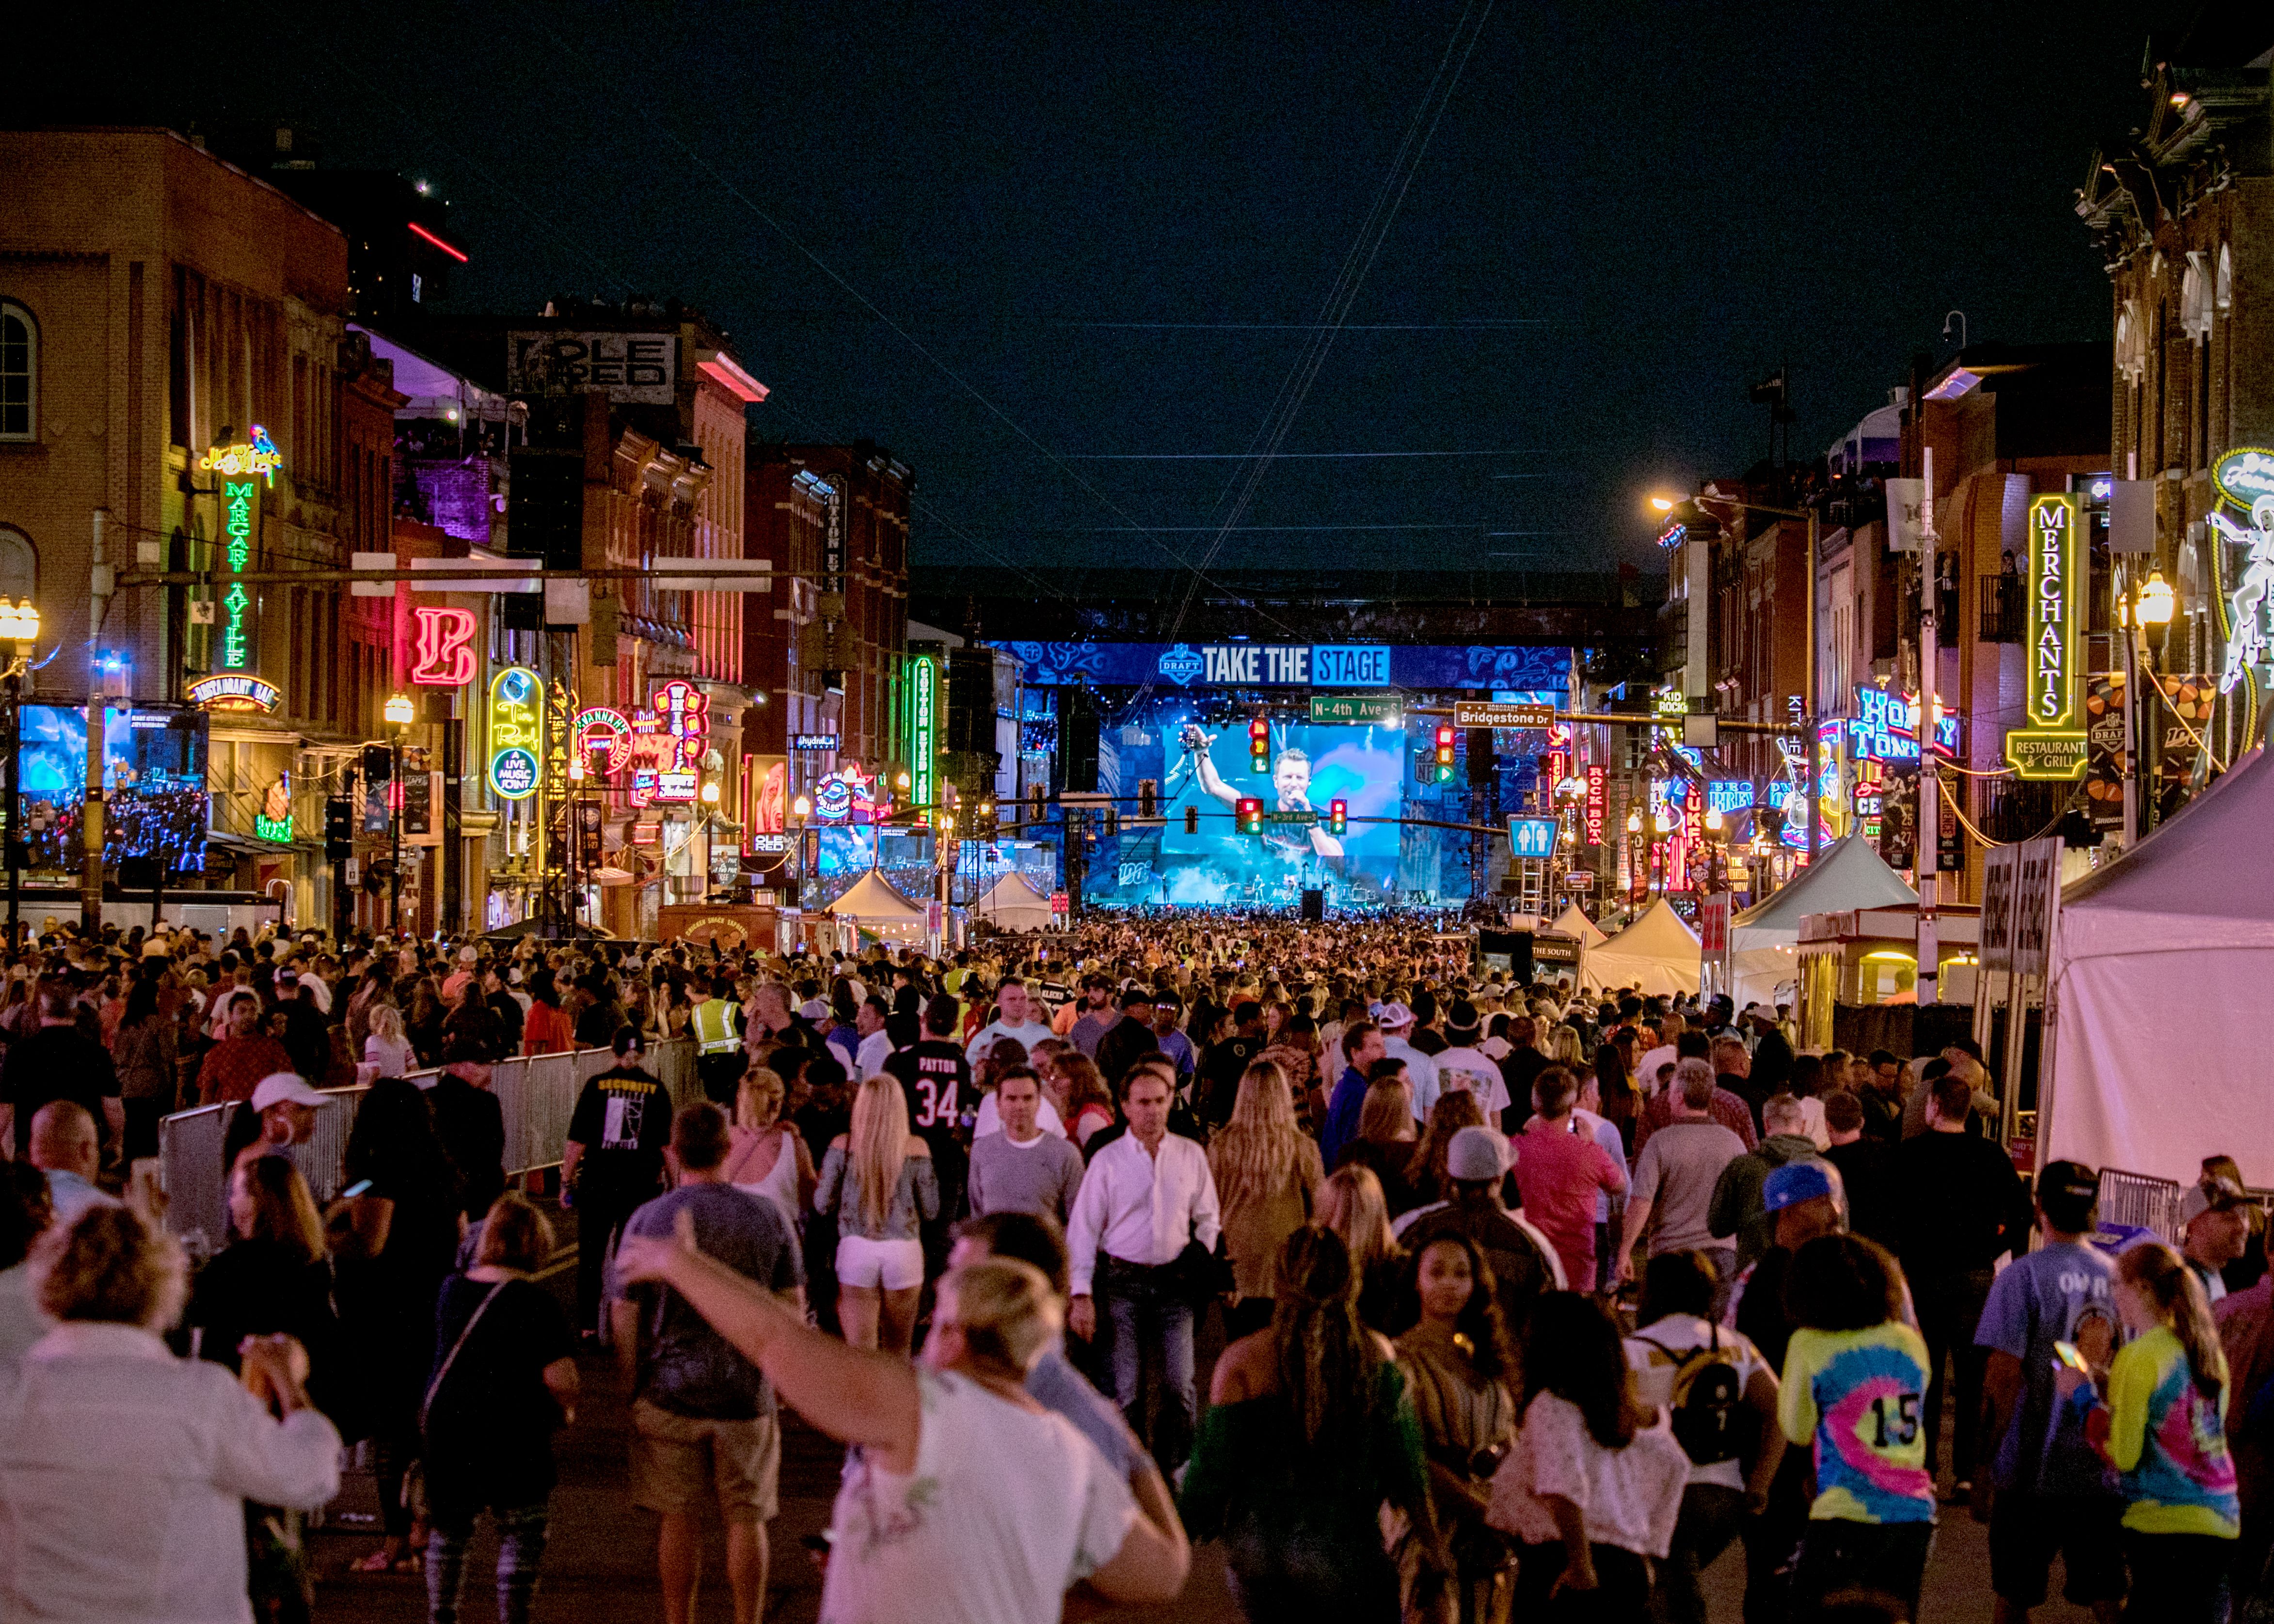 The crowd gathered on lower Broadway in 2019 for the NFL Draft.